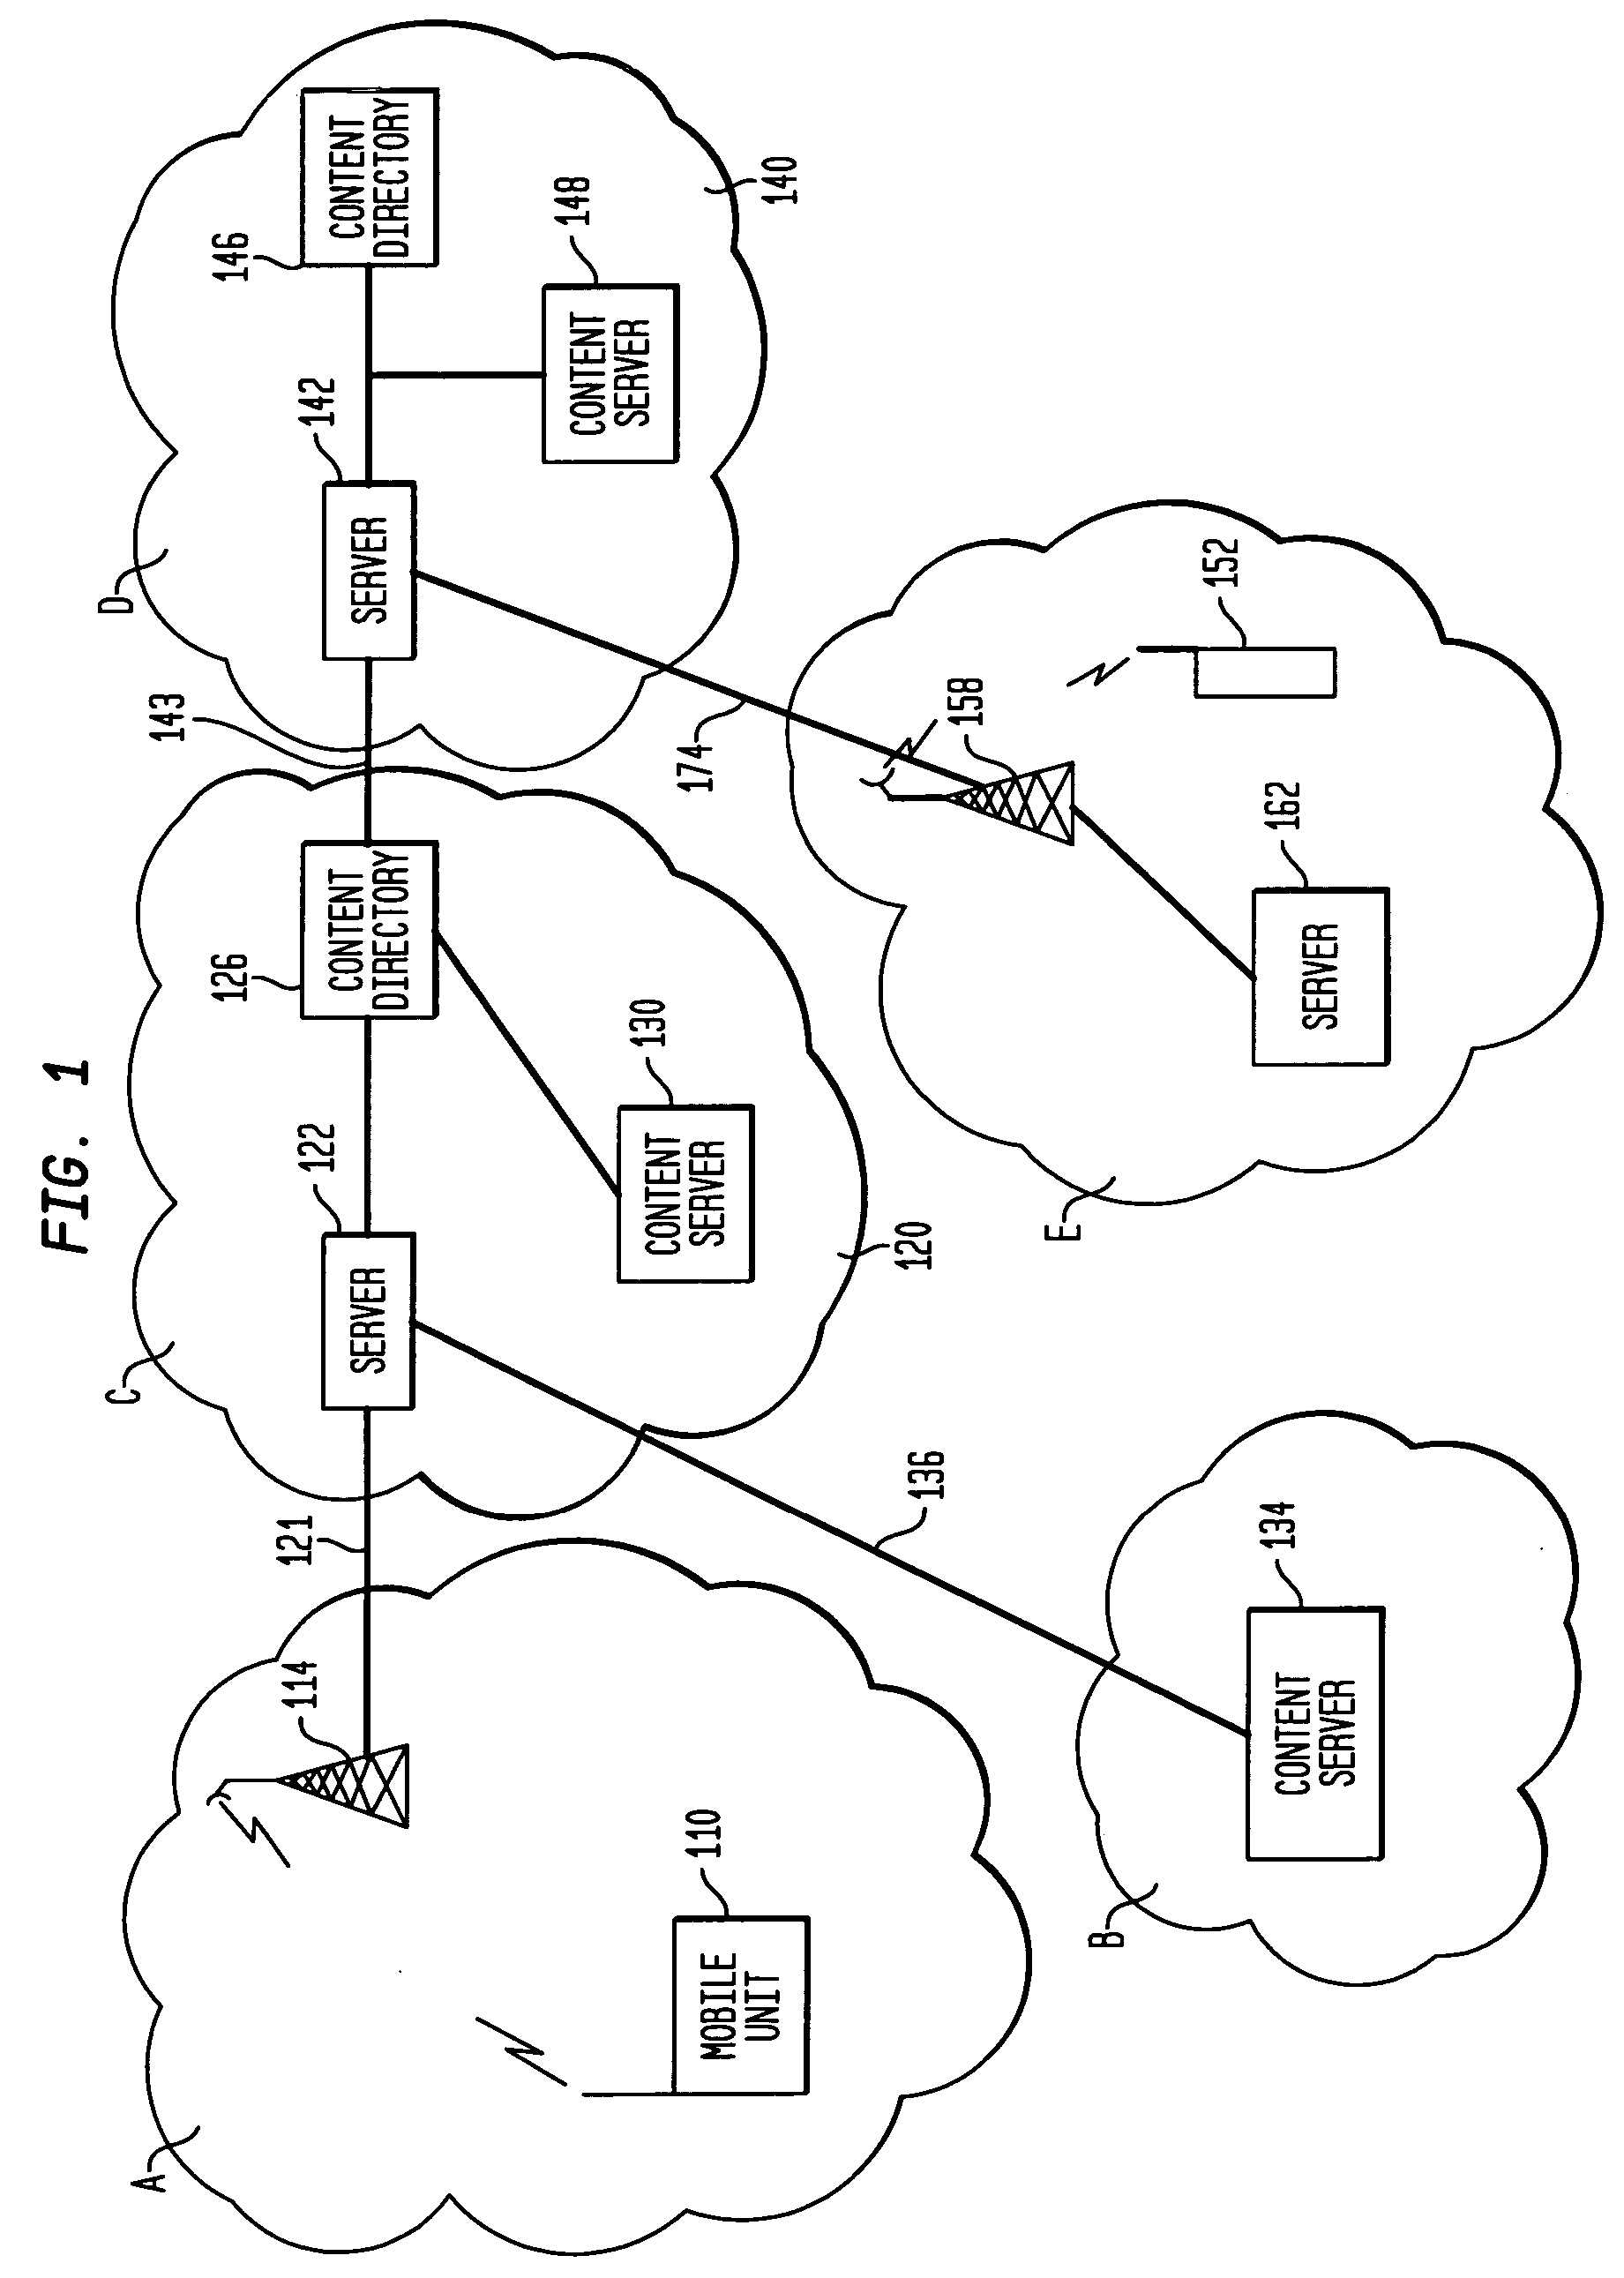 Method, apparatus and system for a location-based uniform resource locator